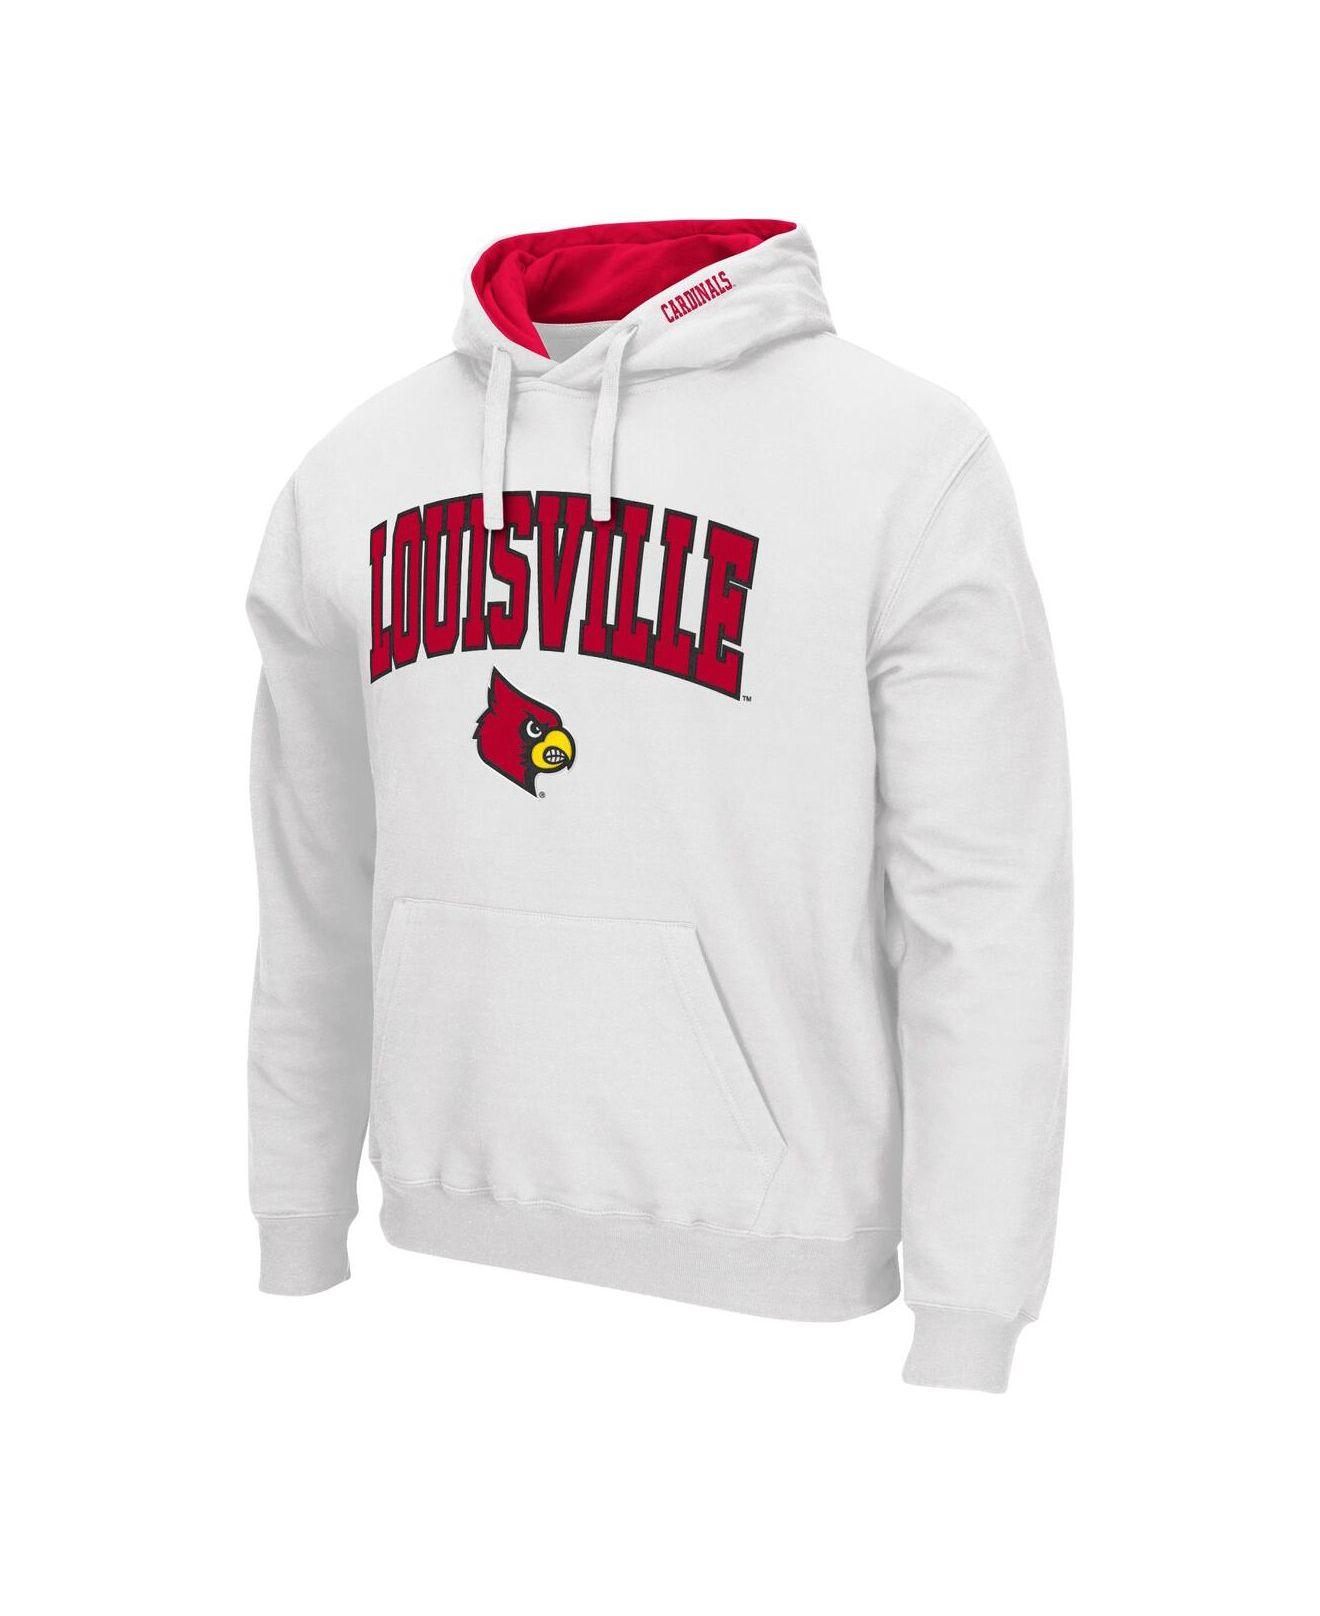 Men's Colosseum Red Louisville Cardinals Arch & Logo 3.0 Pullover